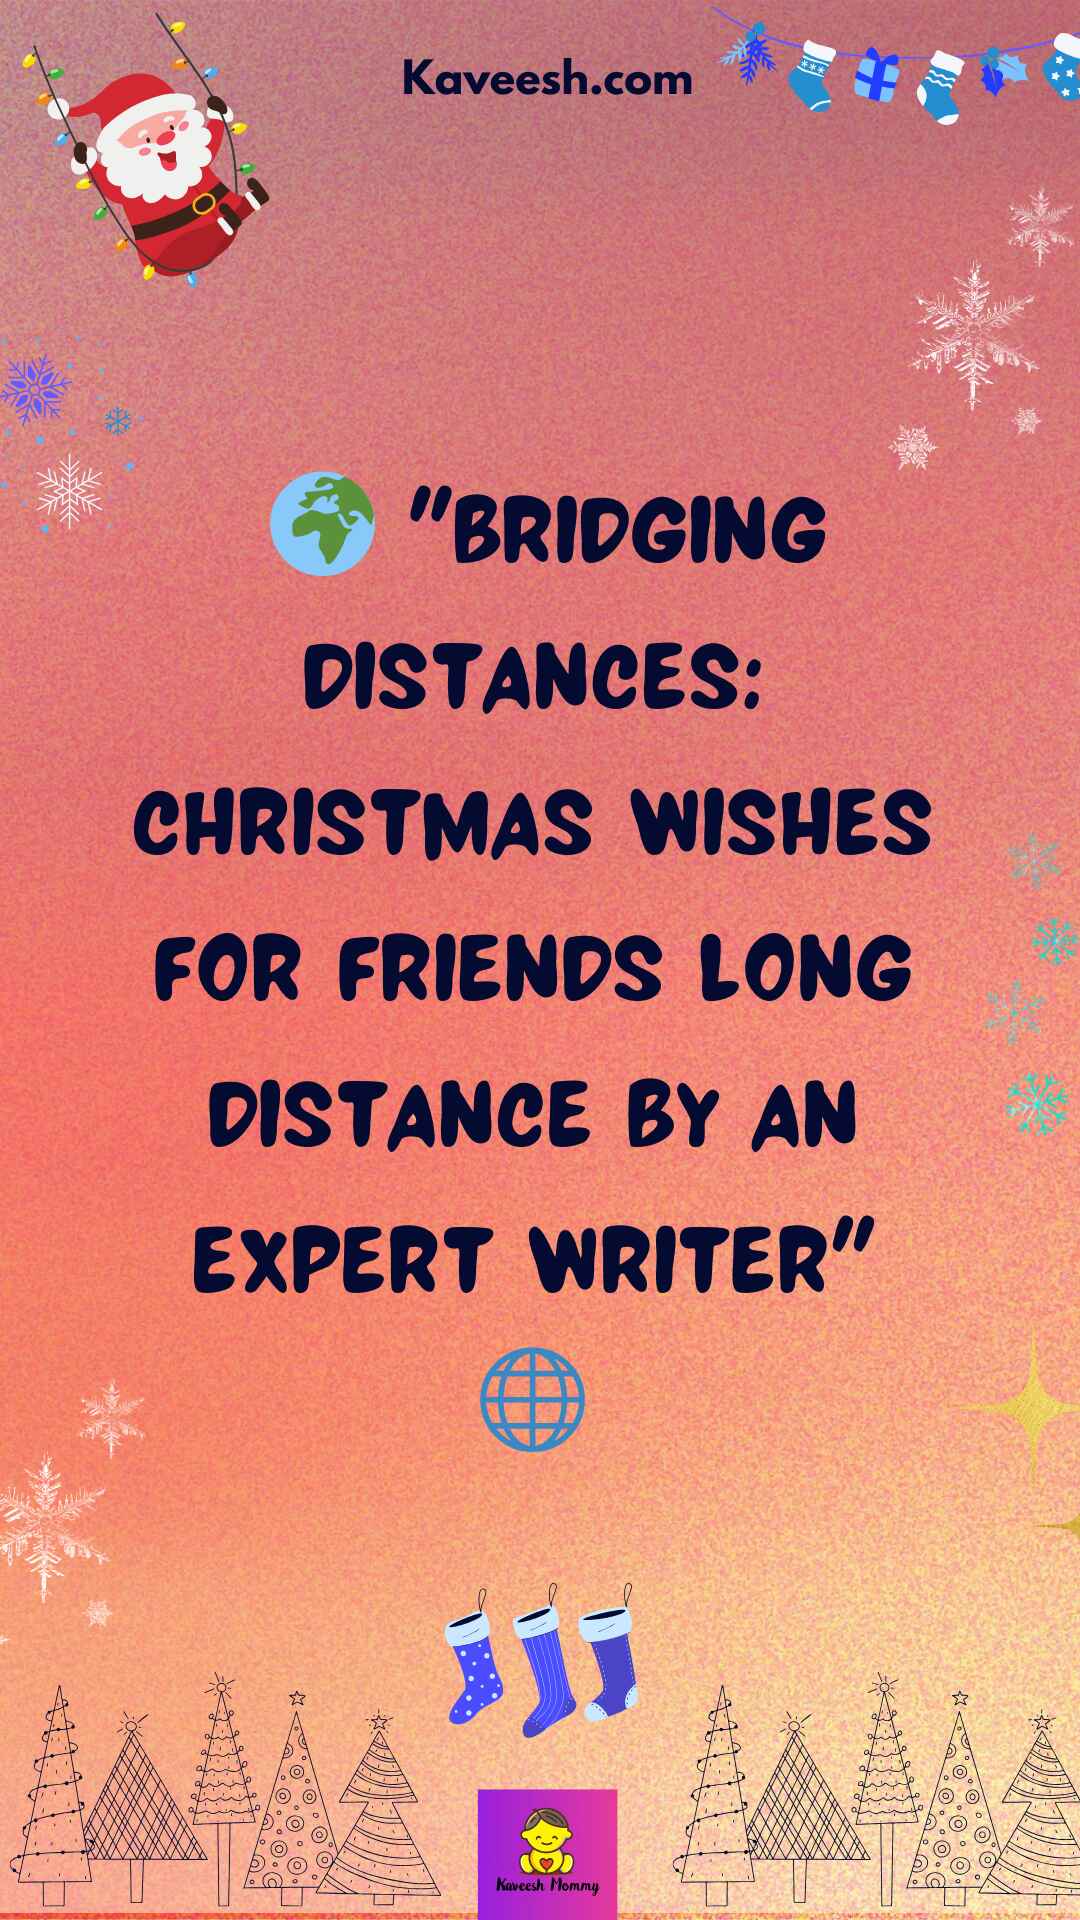 List of Merry Christmas Wishes for Long-Distance Friends